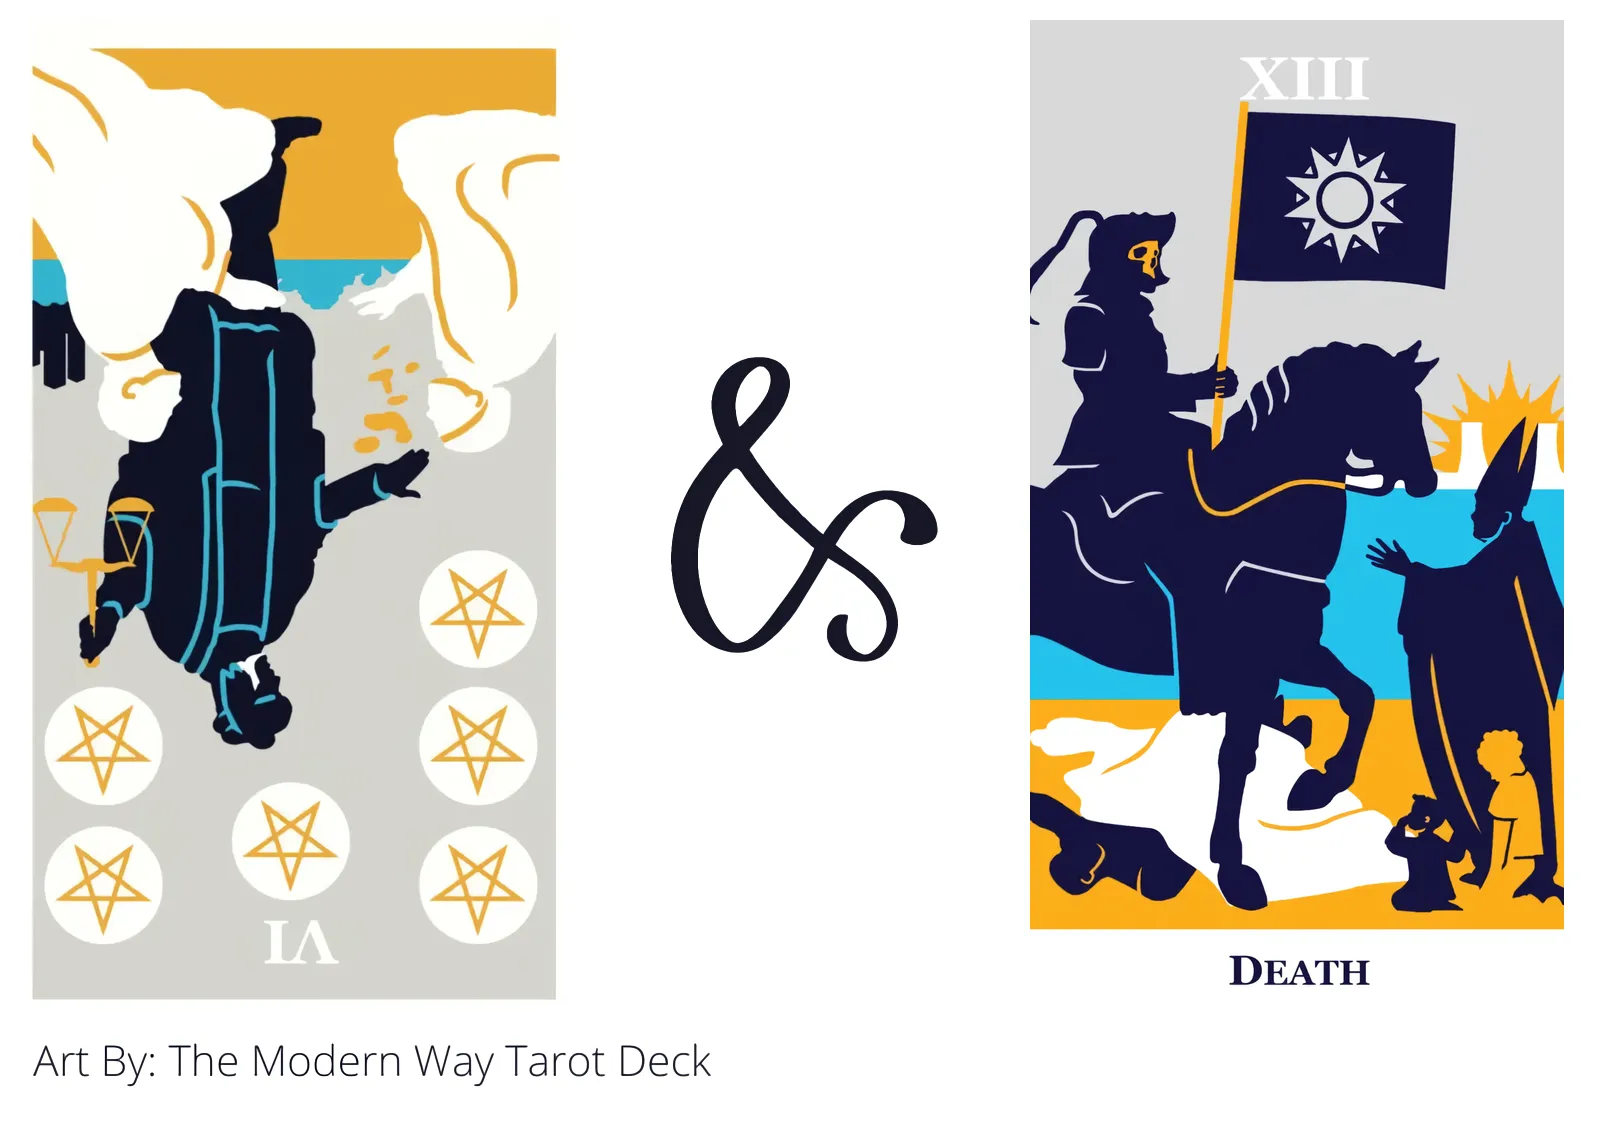 six of pentacles reversed and death tarot cards together